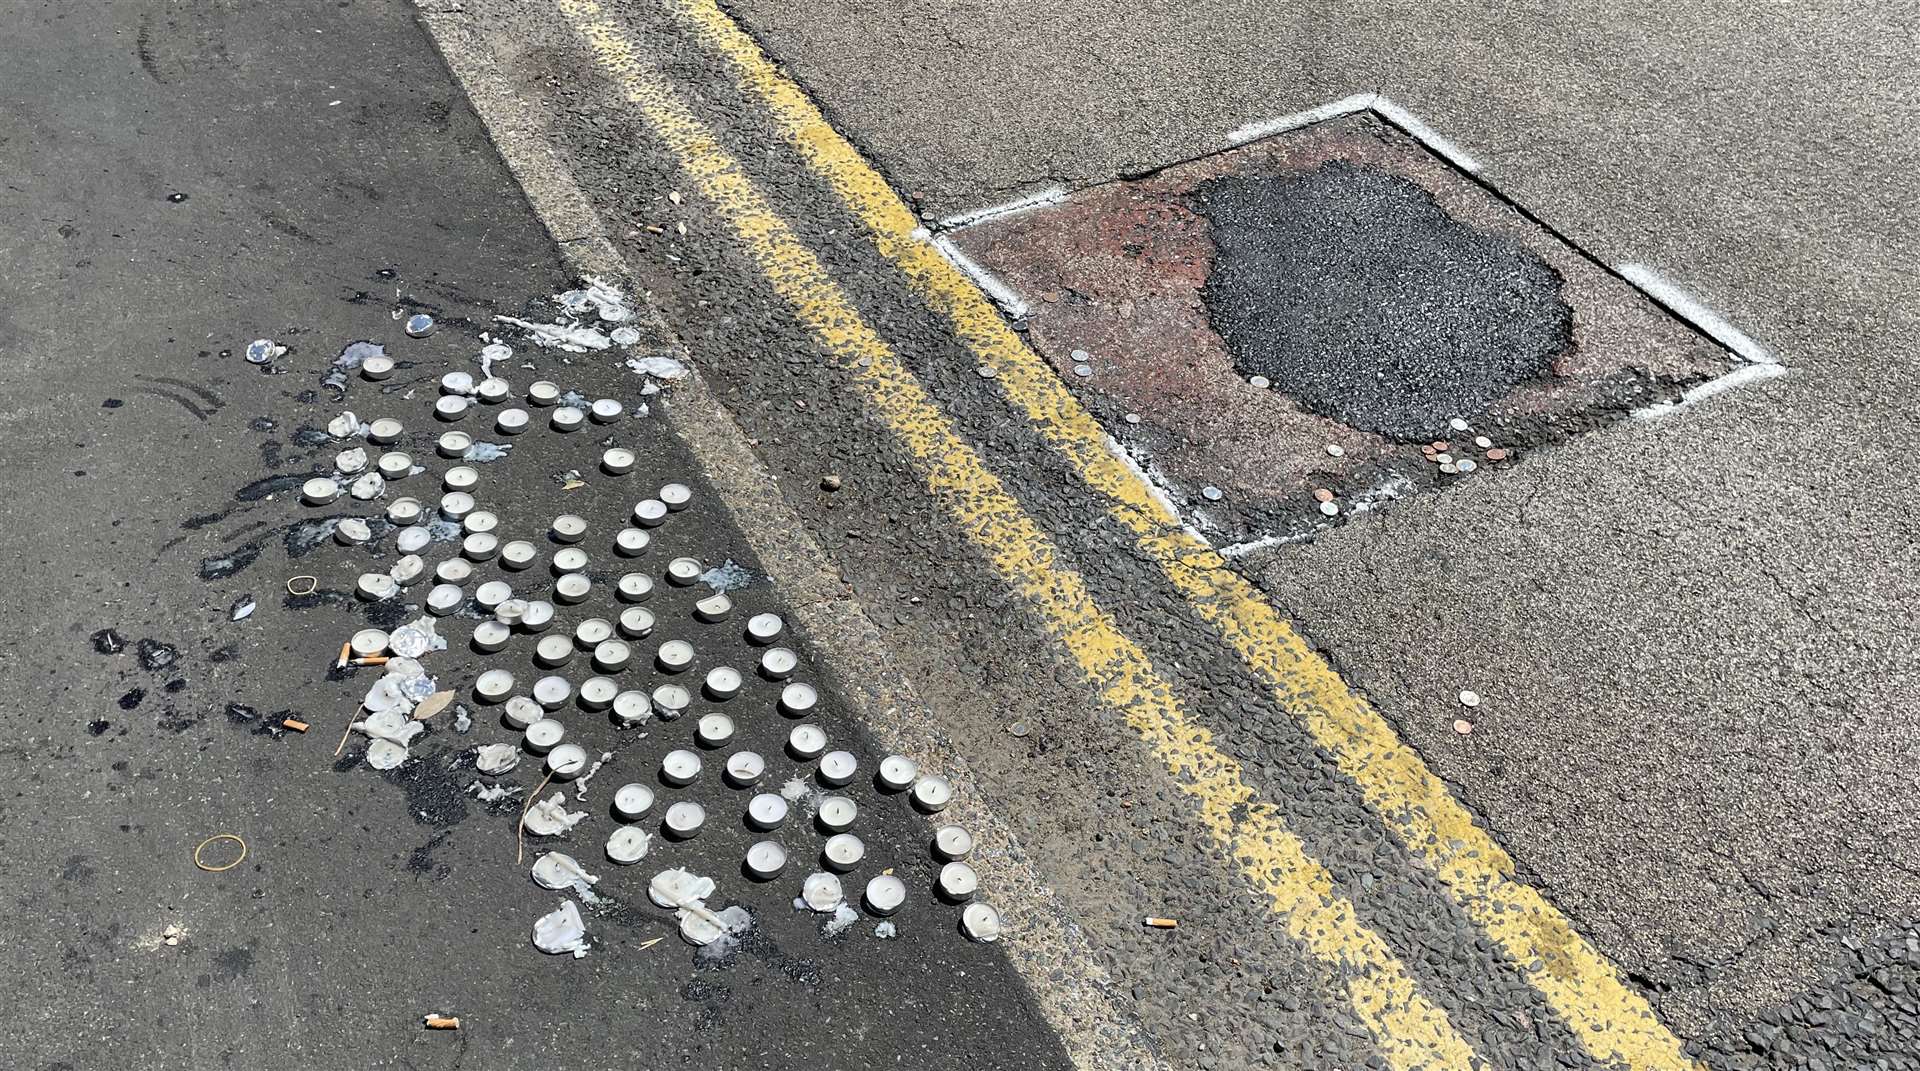 Candles have been left by a recently patched pothole close to the tributes